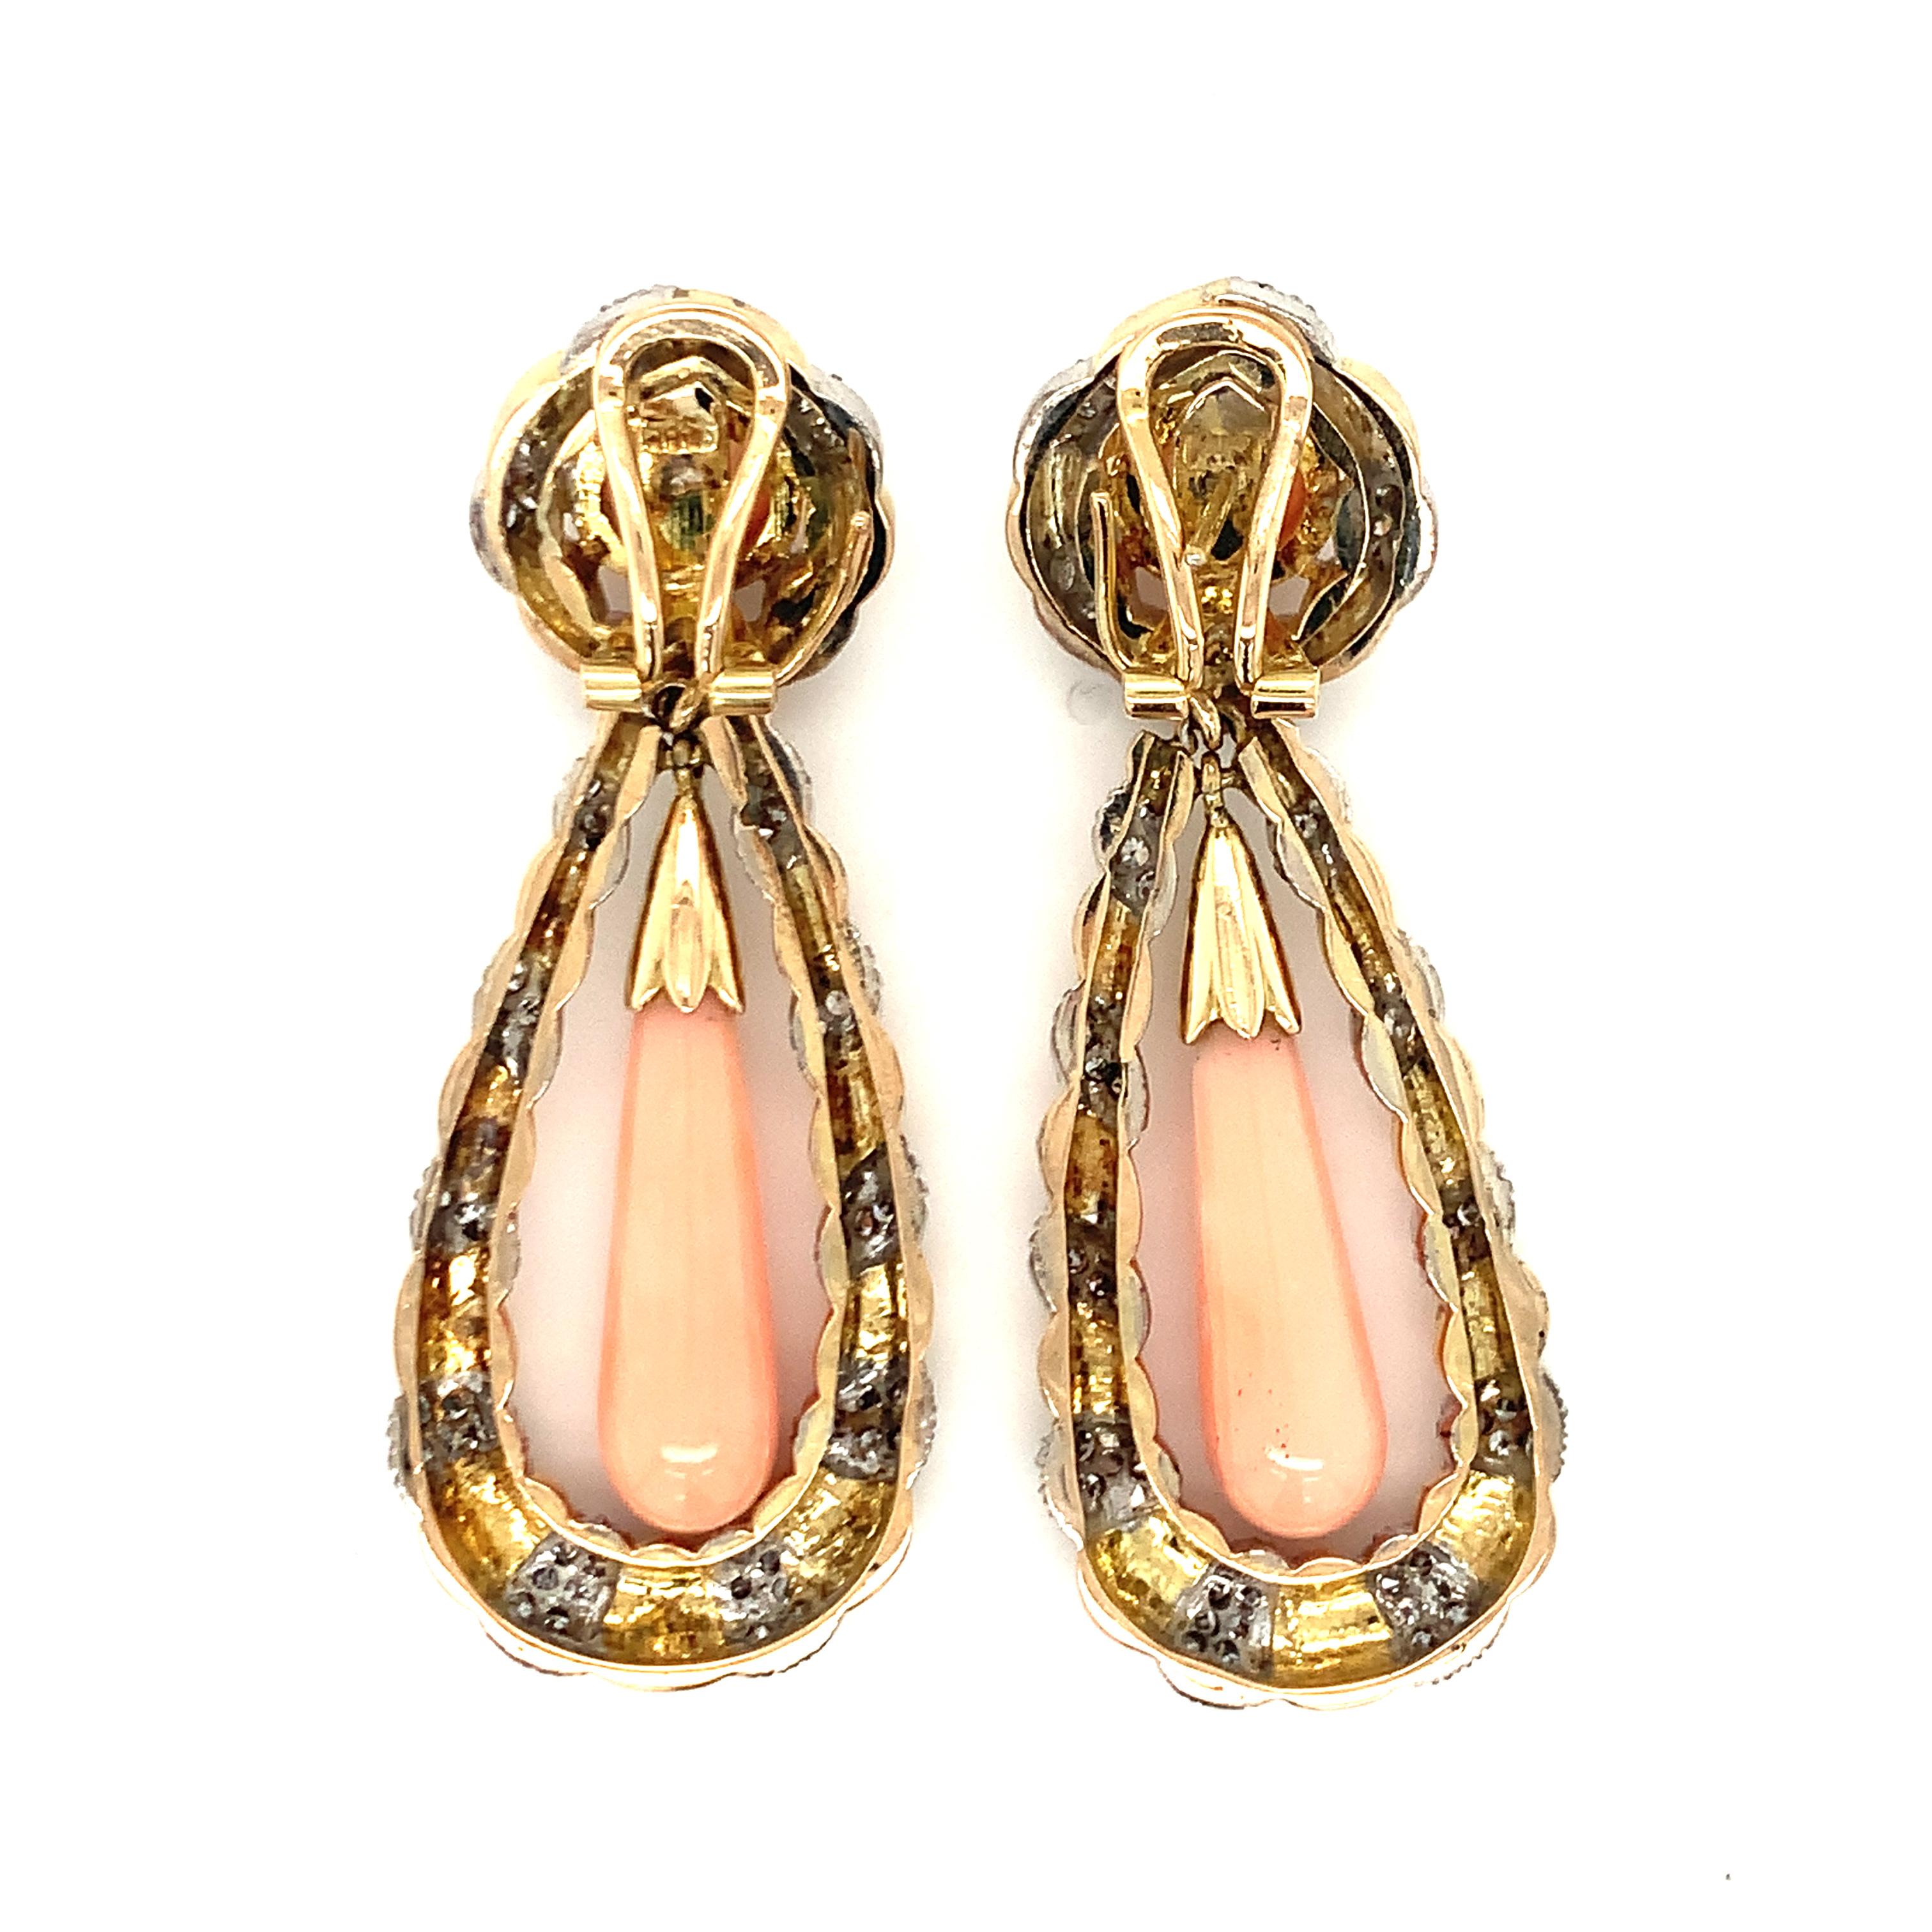 One pair of pink coral and diamond dangling 14K yellow and white gold earrings featuring four coral portions – two round cabochons (8 mm. diameter) and two pear drop portions (20 mm. long). The earrings also feature 128 single round cut diamonds